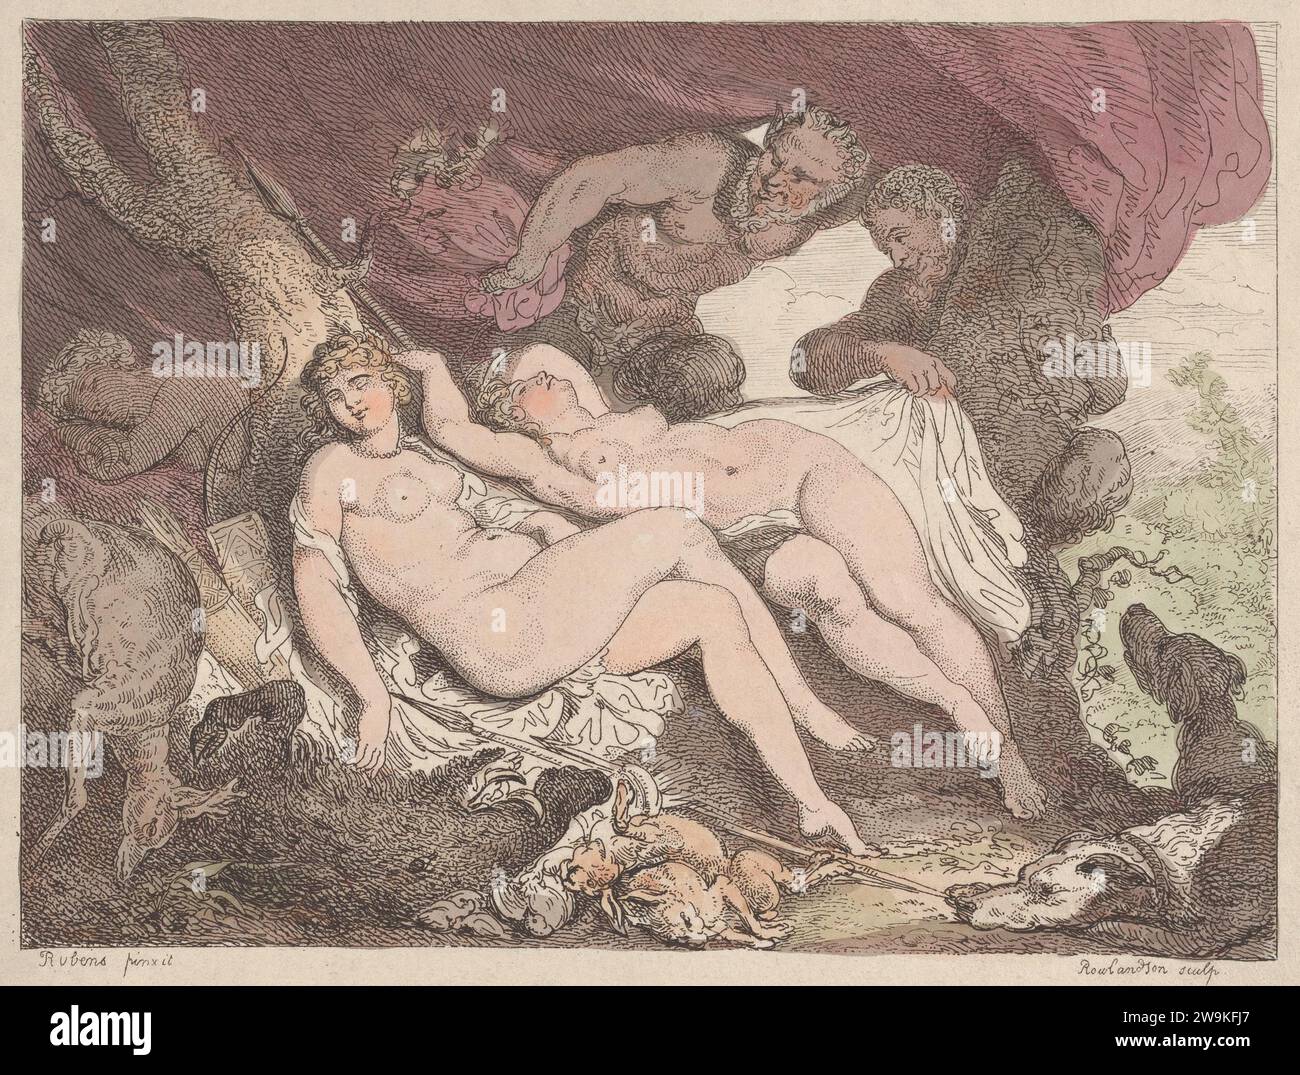 Diana and Her Nymphs Spied on by Satyrs 1959 by Peter Paul Rubens Stock Photo